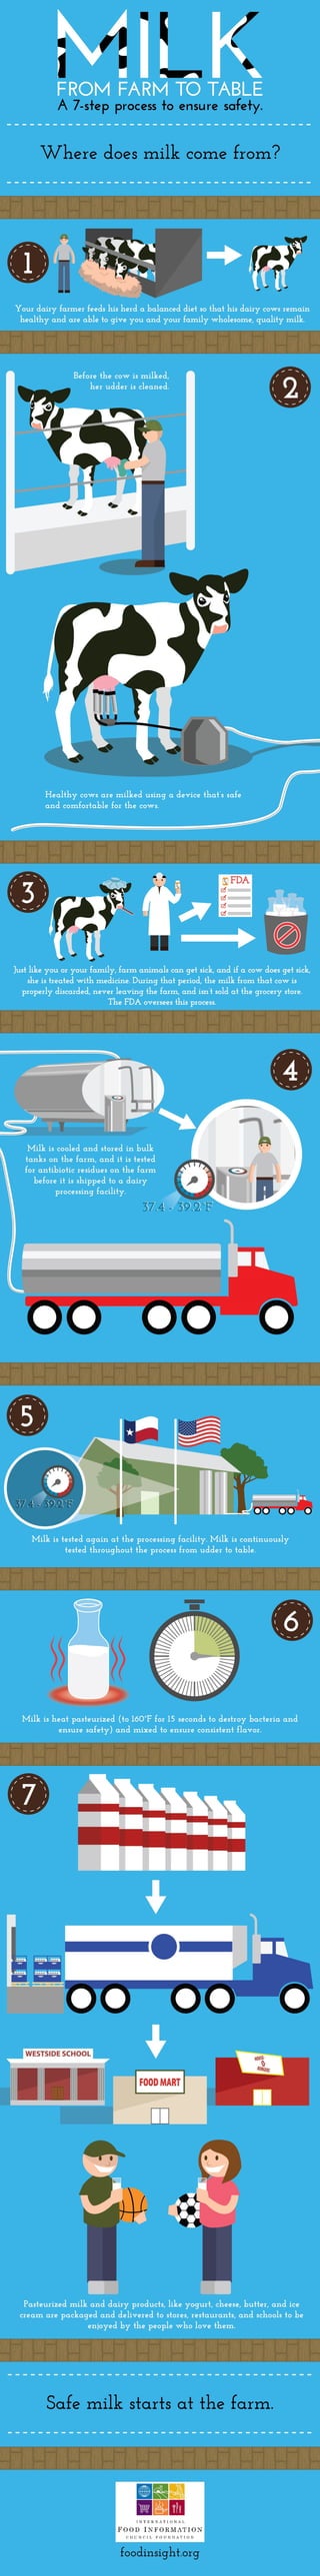 Final  milk production infographic  2014